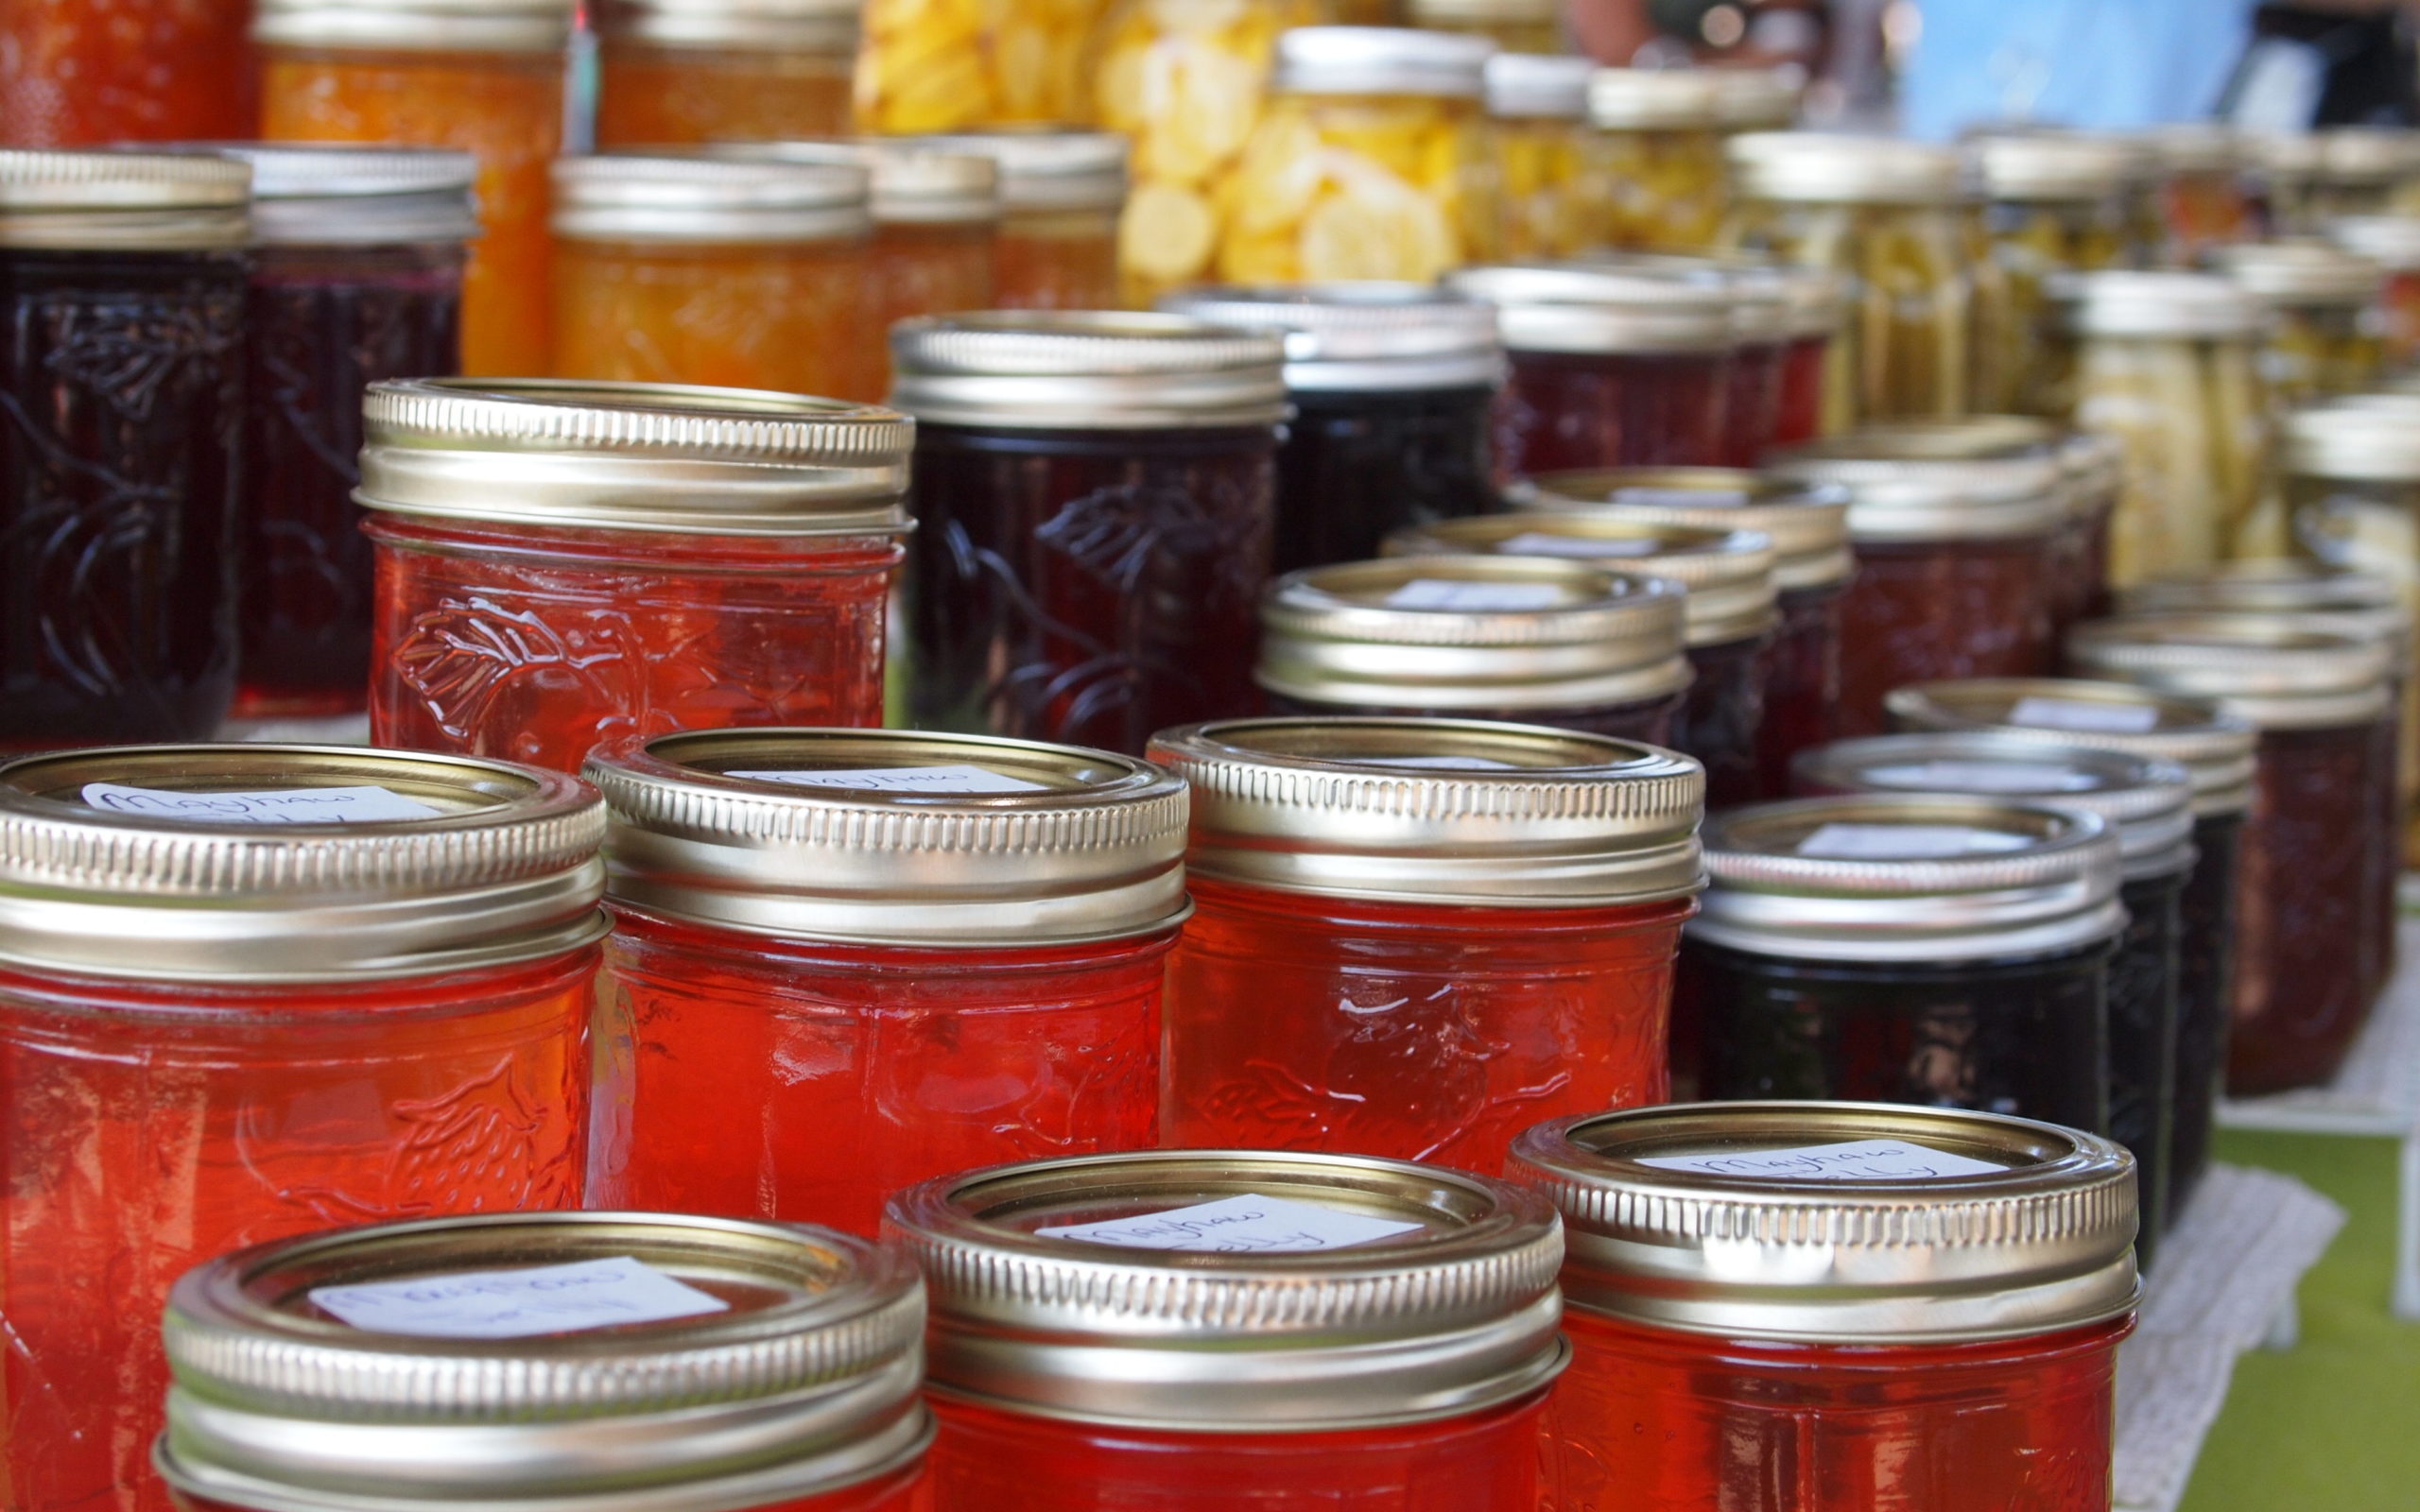 Jams and jellies at a farmers market. Photo credit: Flickr user shreveportbossier